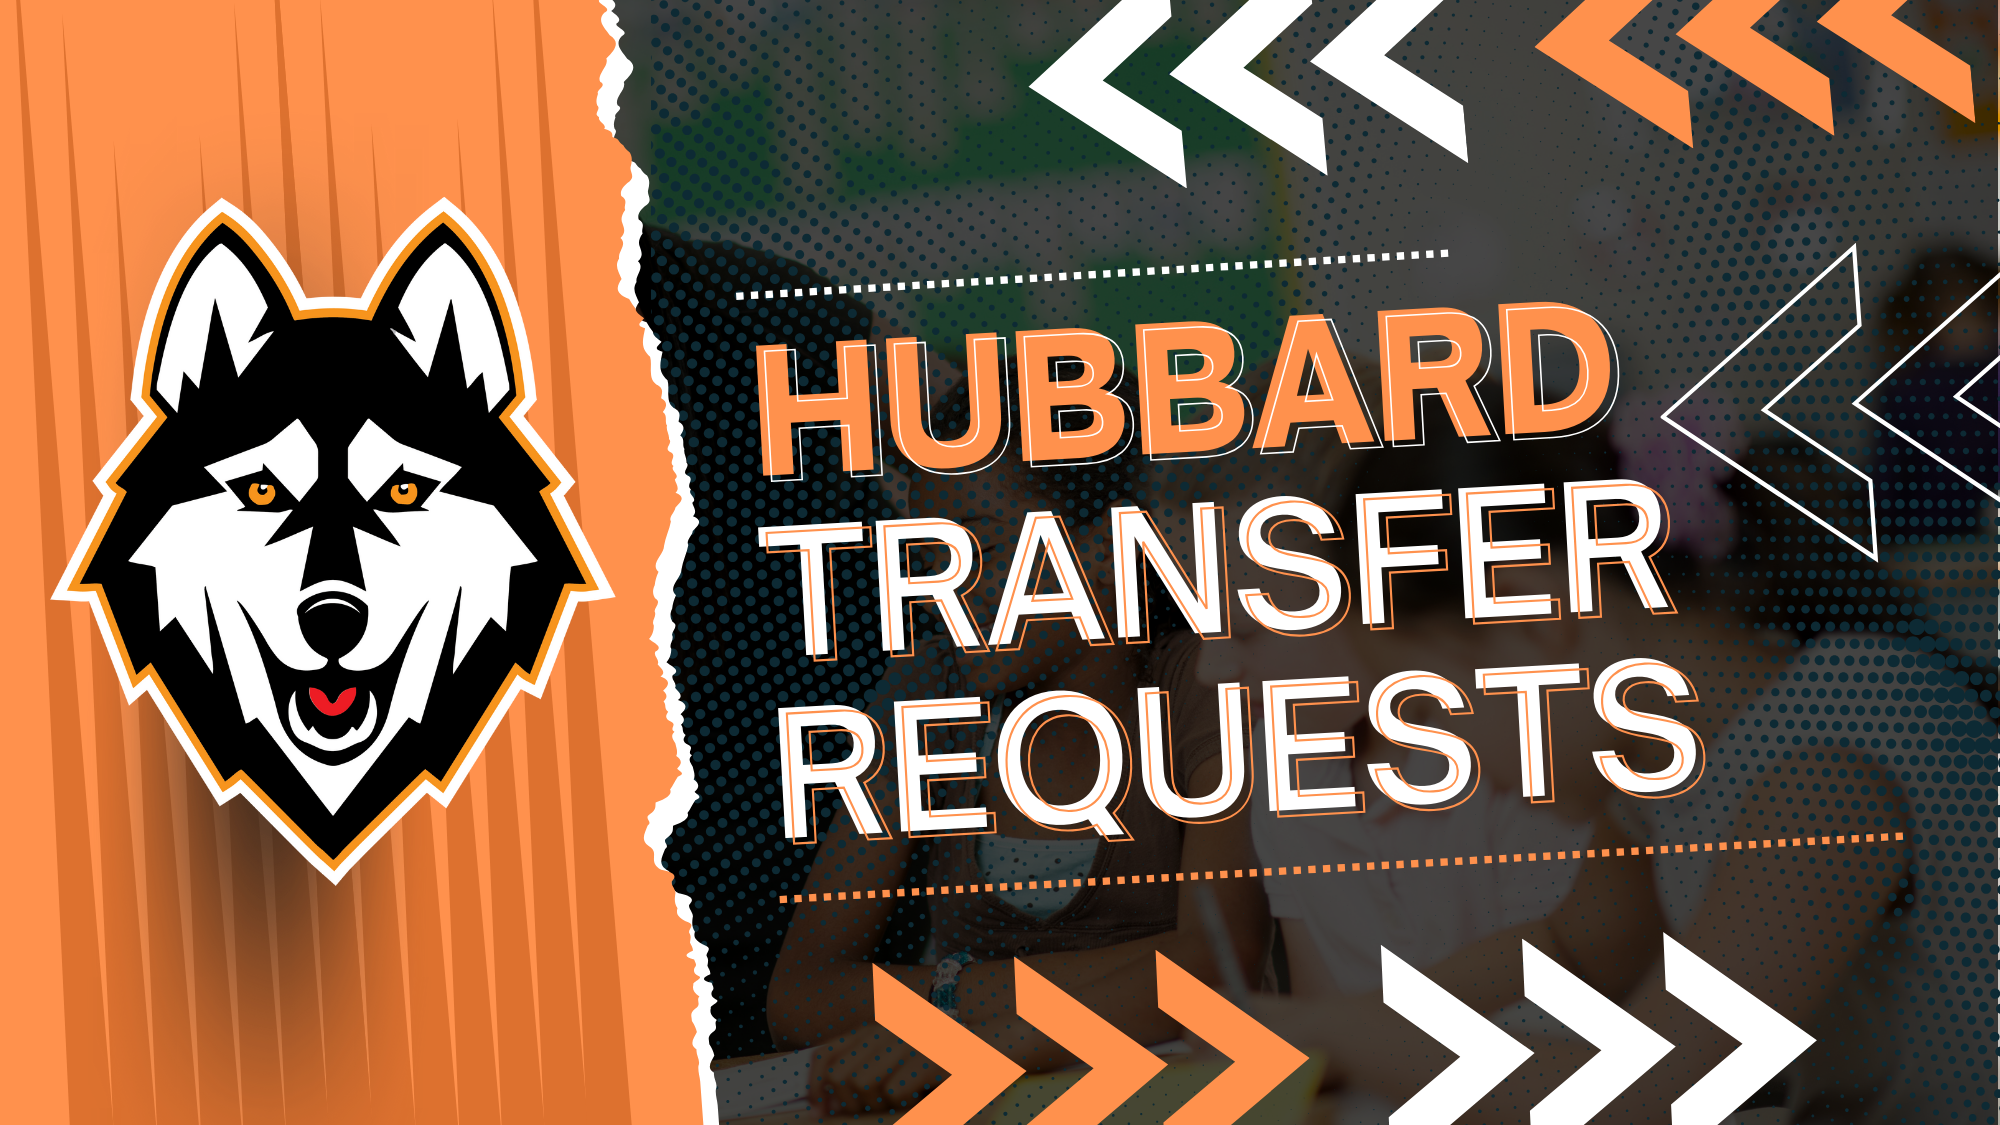 husky head logo over transparent background with students, "hubbard transfer requests"